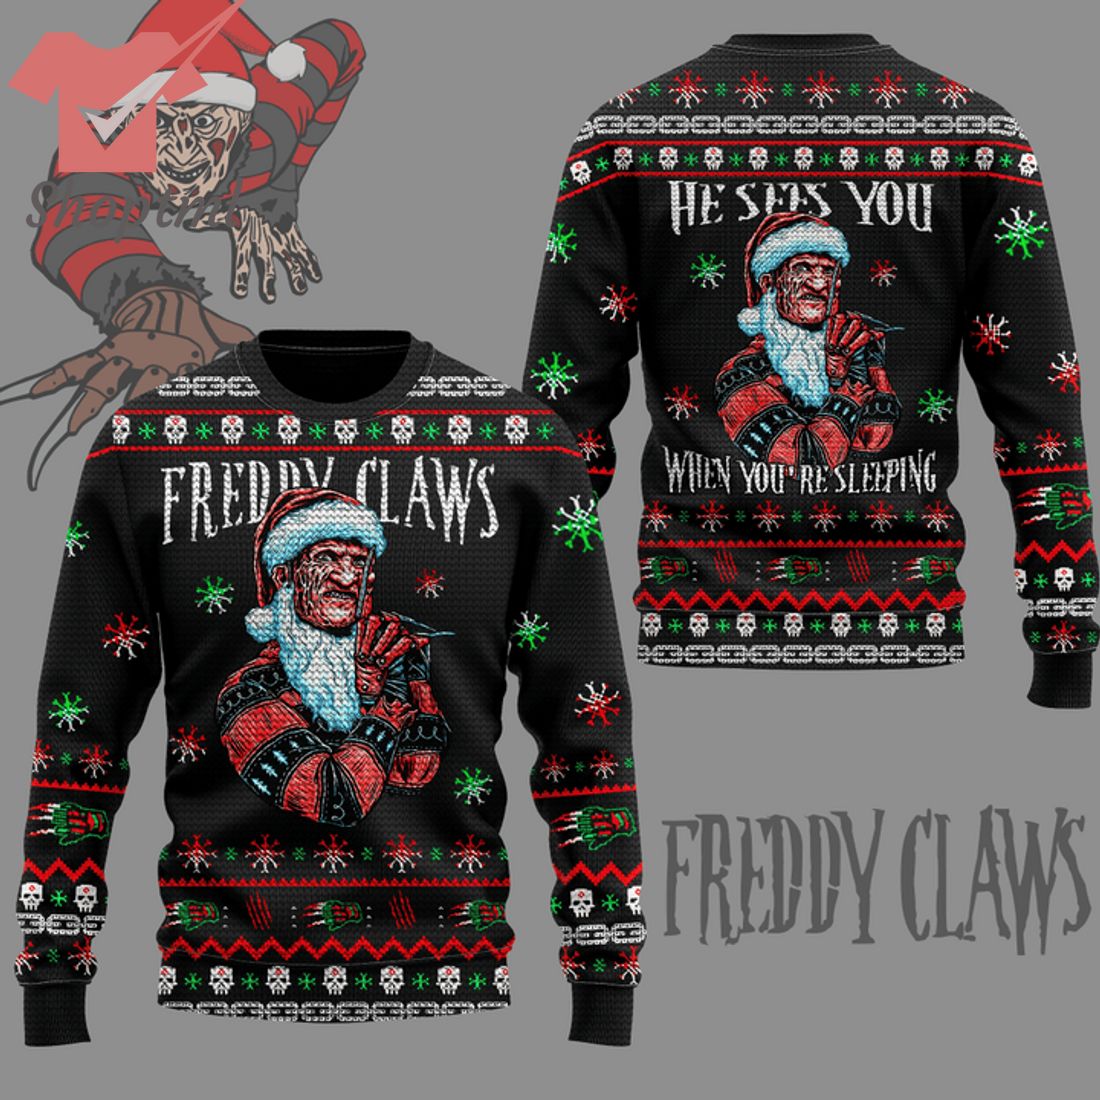 Freddy Krueger Claws He Sees You When You're Sleeping Ugly Christmas Sweater